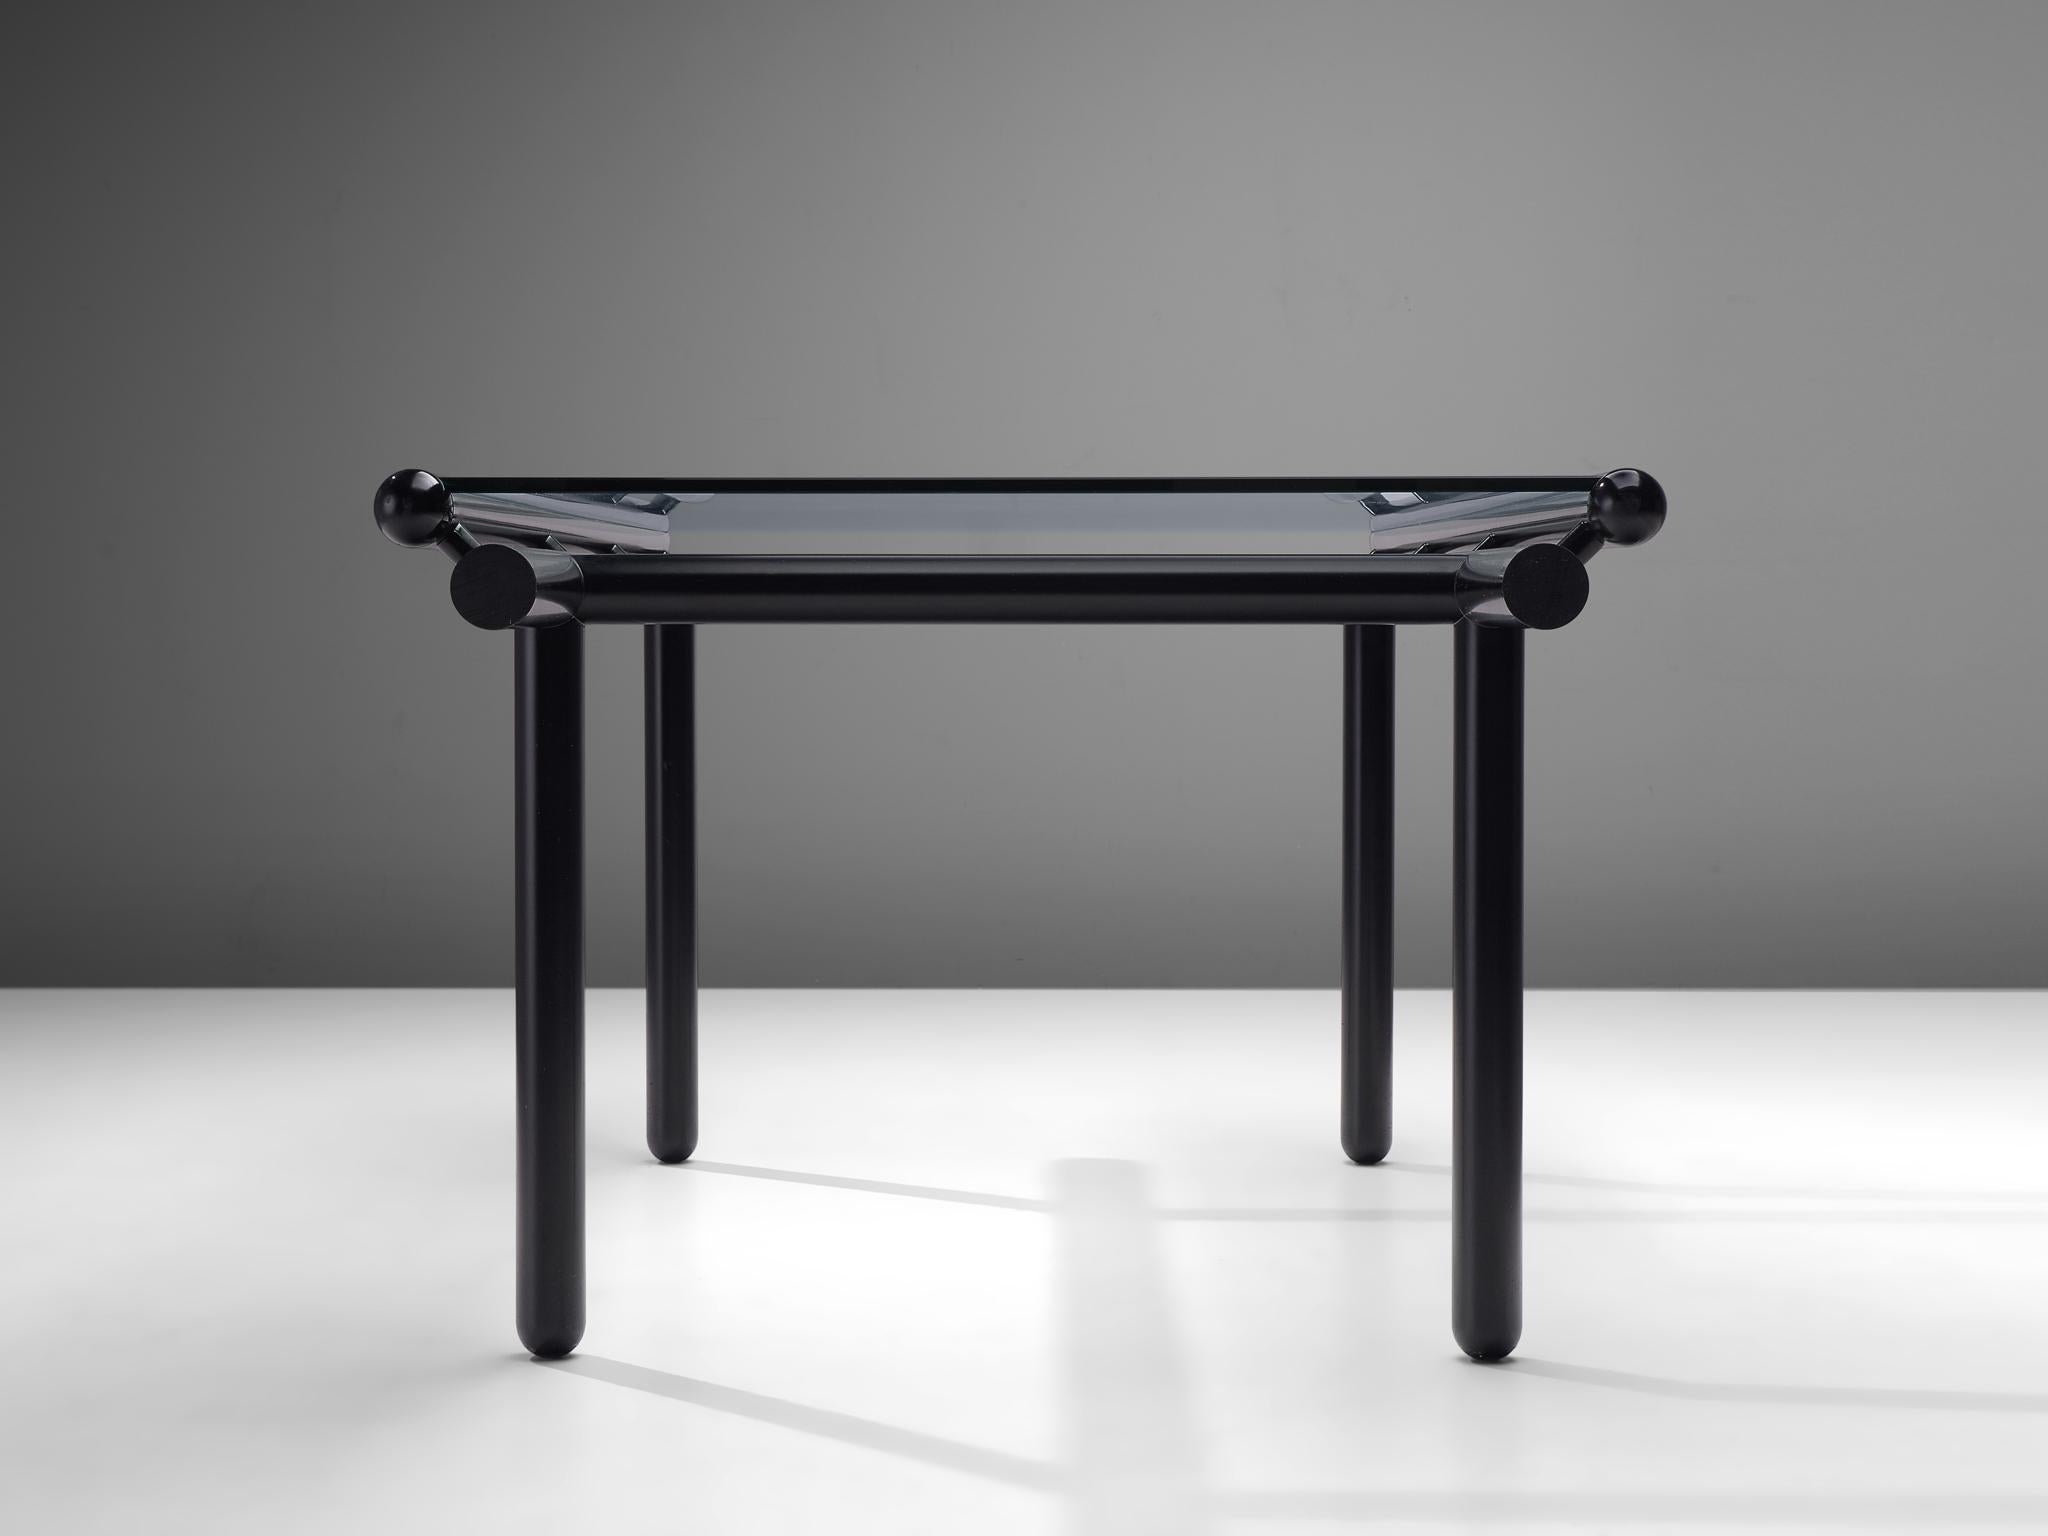 Cassina Dining Table 'Capri' in Black Metal and Glass